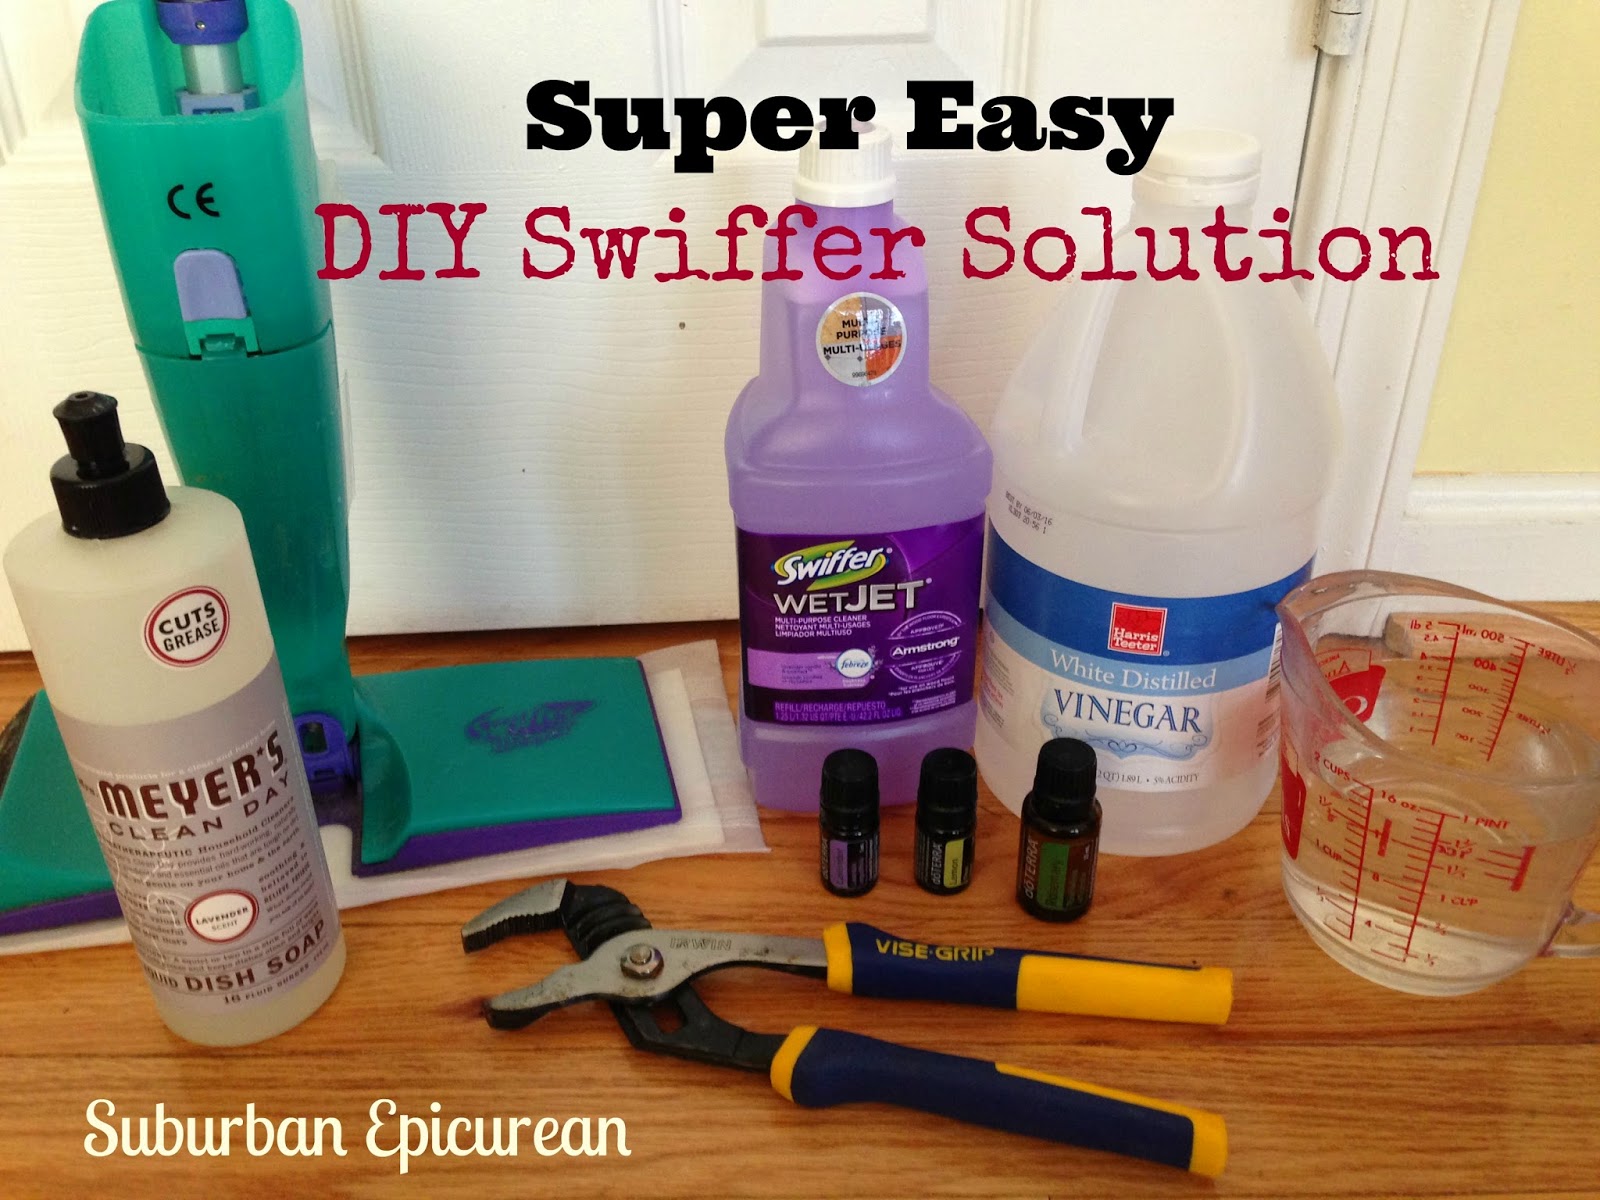 How to Make your Own (Natural) Swiffer WetJet Solution